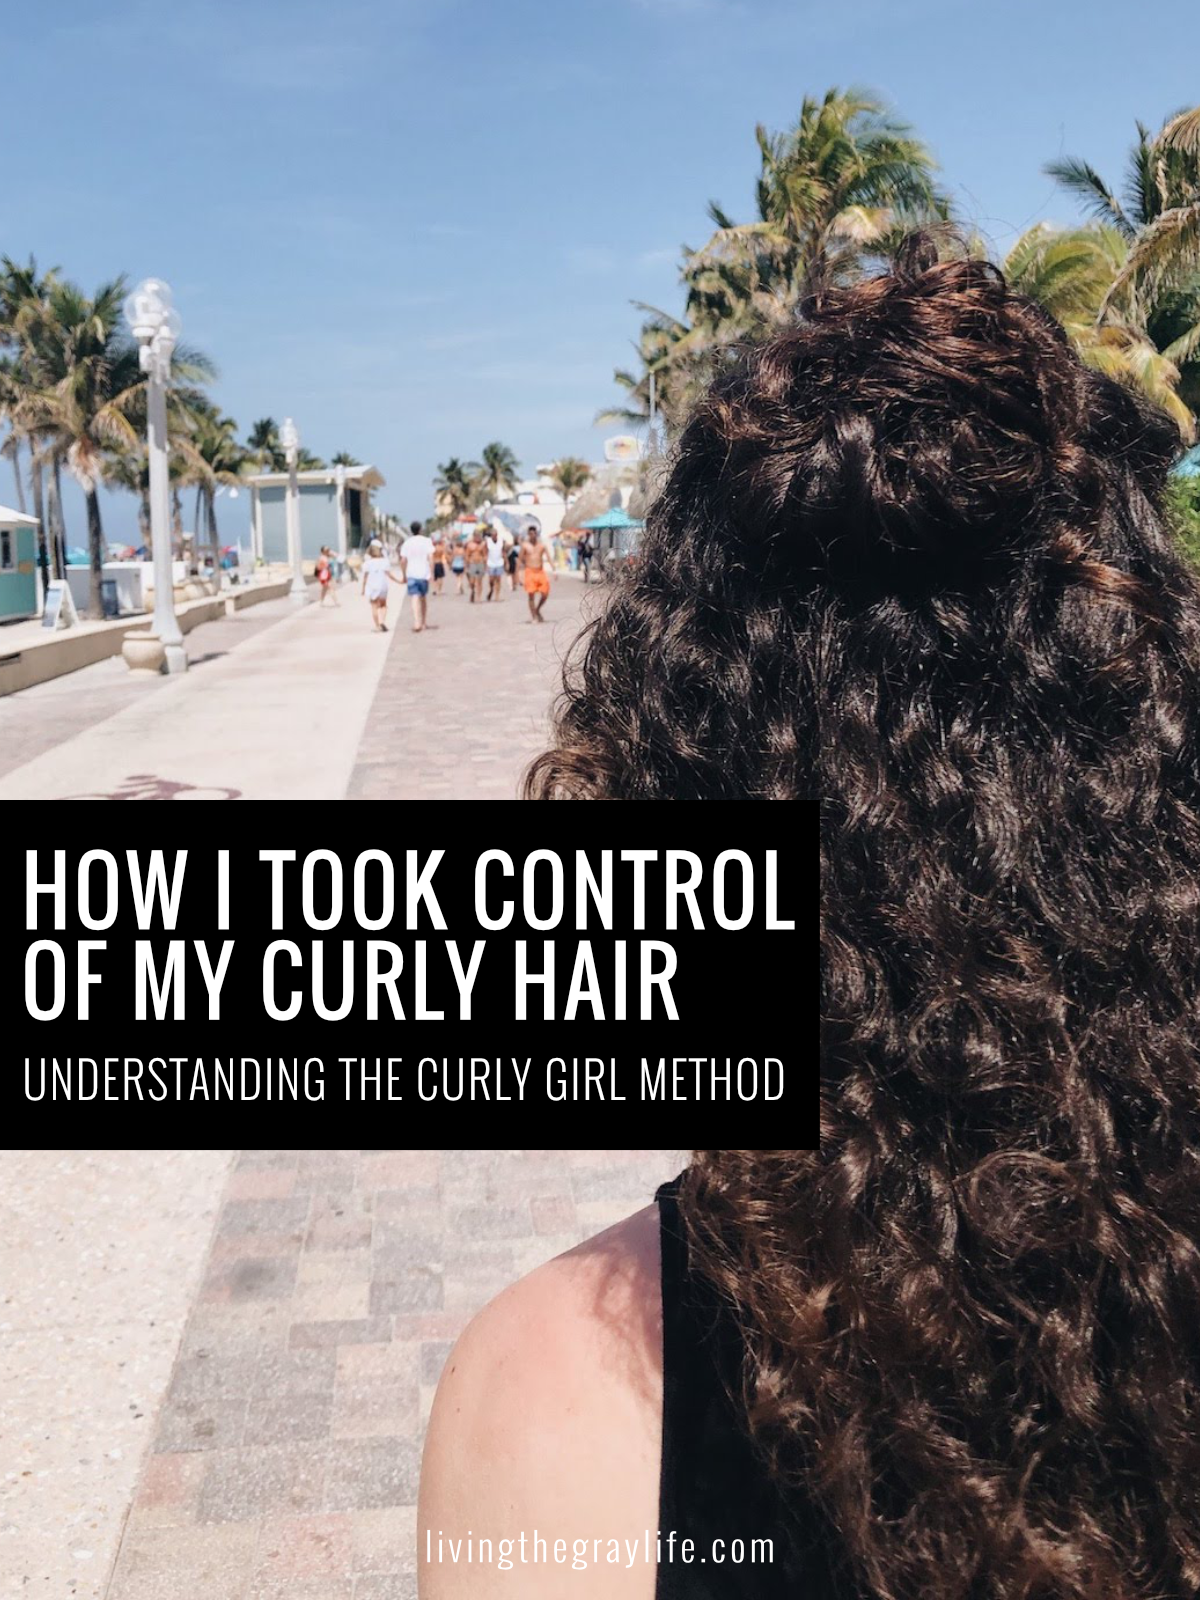 How I Took Control of My Curly Hair